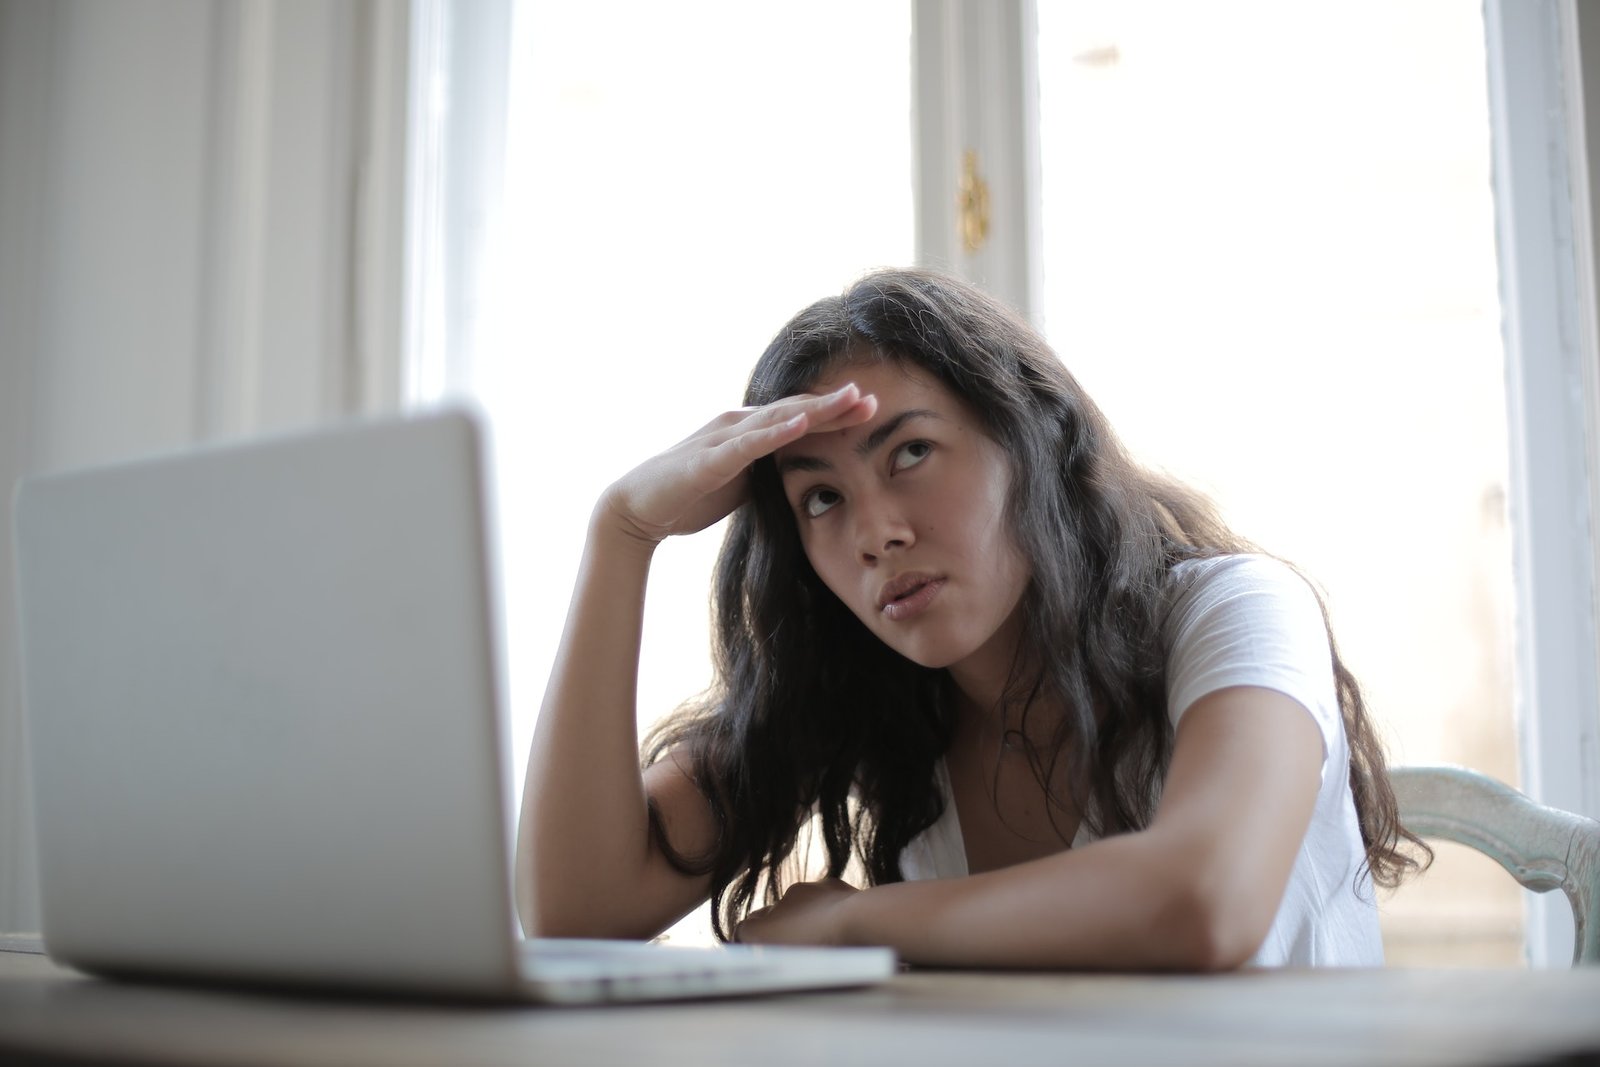 A woman with loose long dark hair sits at her laptop looking discouraged